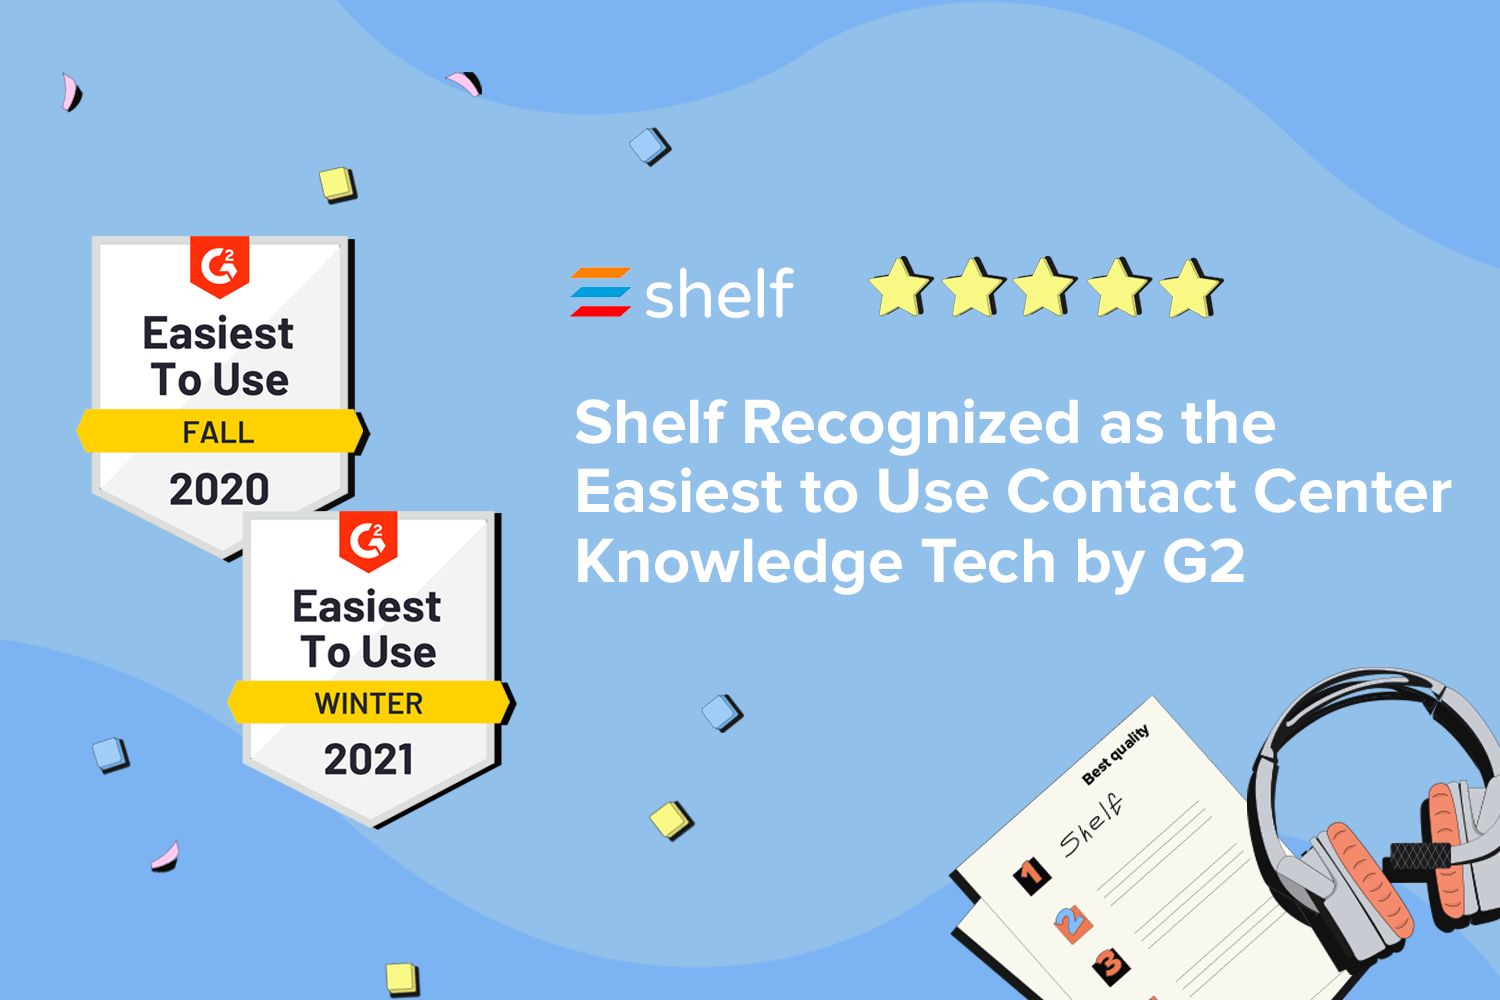 Shelf Recognized as the Easiest to Use Contact Center Knowledge Tech by G2: image 1